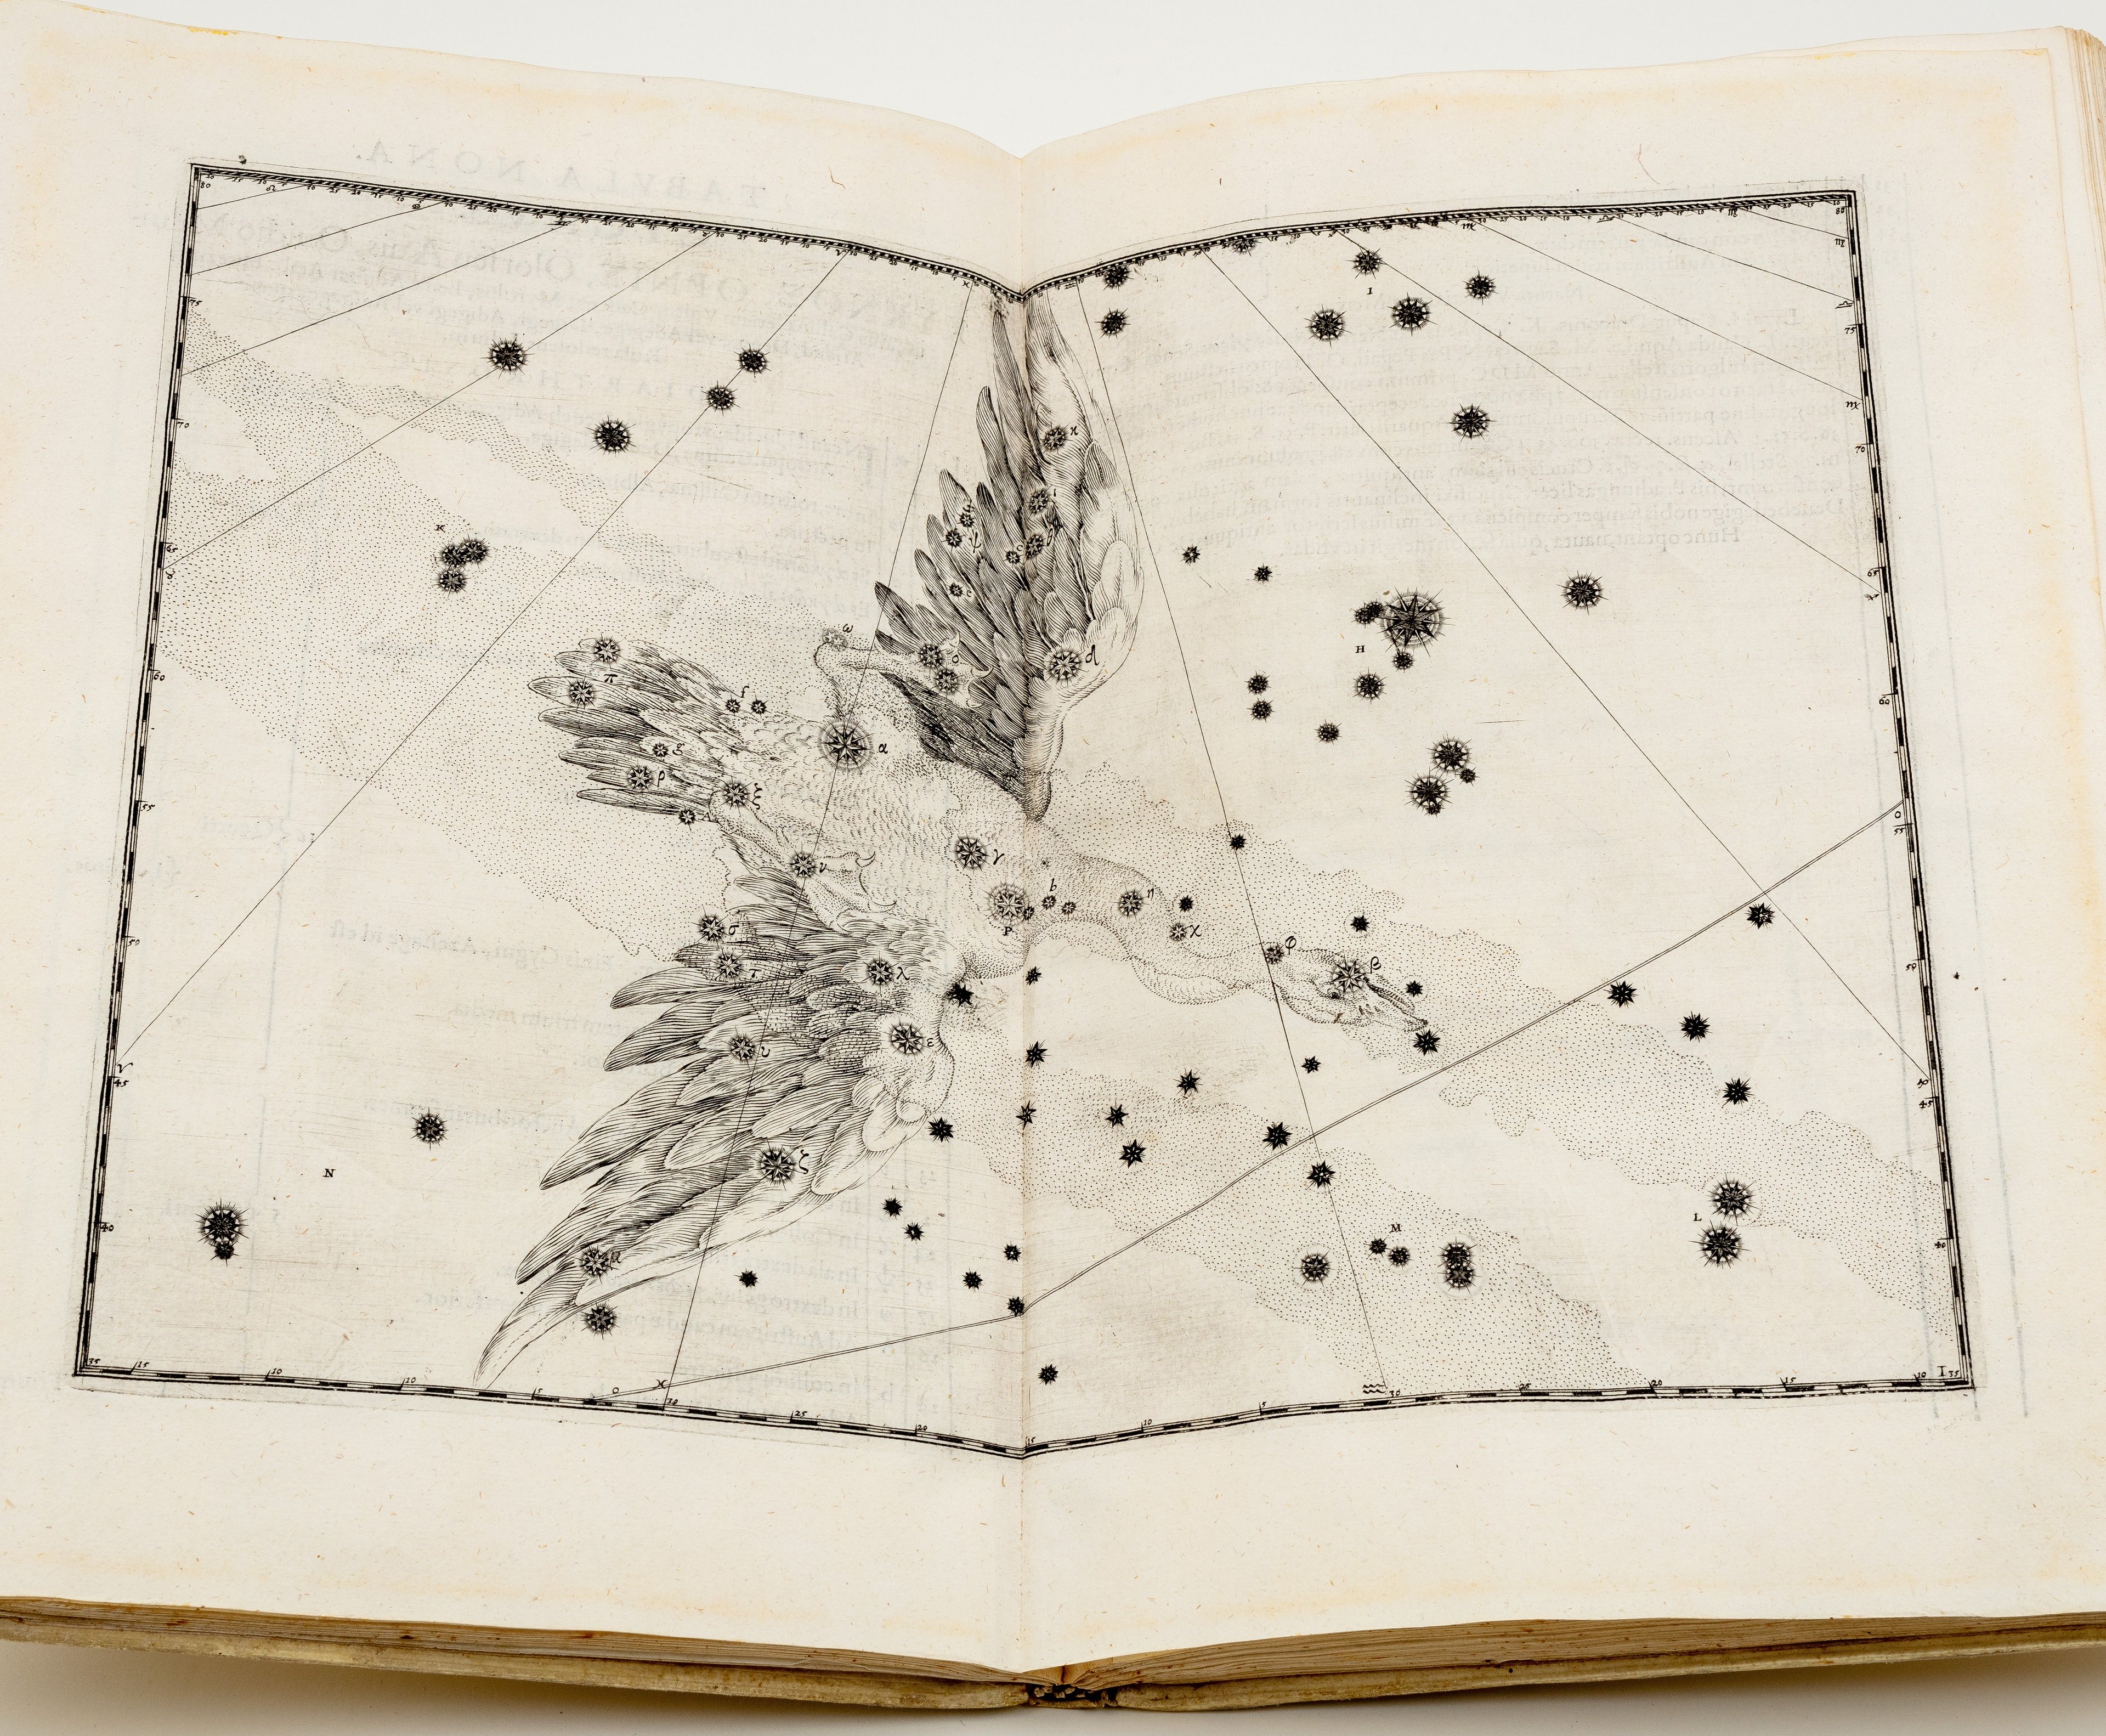 Constellation of Signus the Swan from Bayer Star Chart Atlas